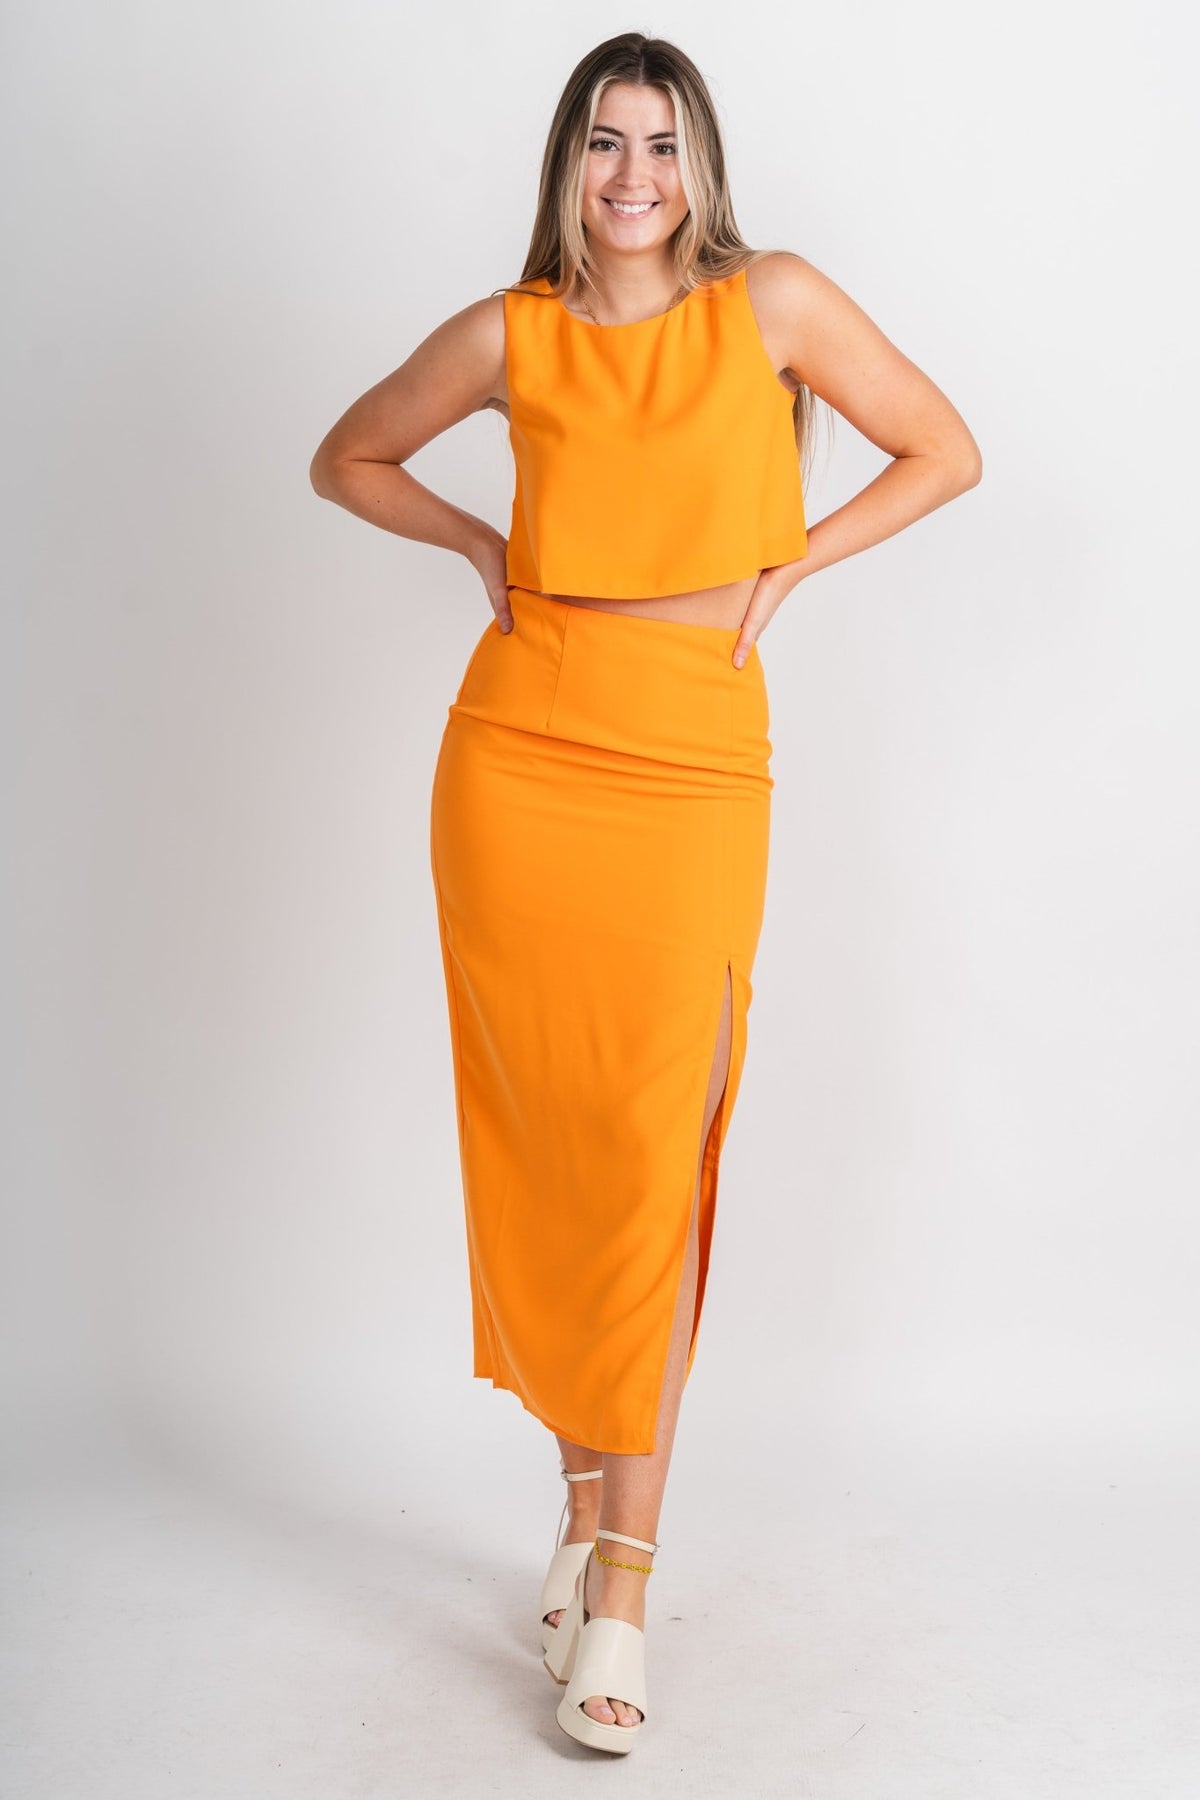 High waist midi skirt orange - Trendy Skirt - Cute Vacation Collection at Lush Fashion Lounge Boutique in Oklahoma City